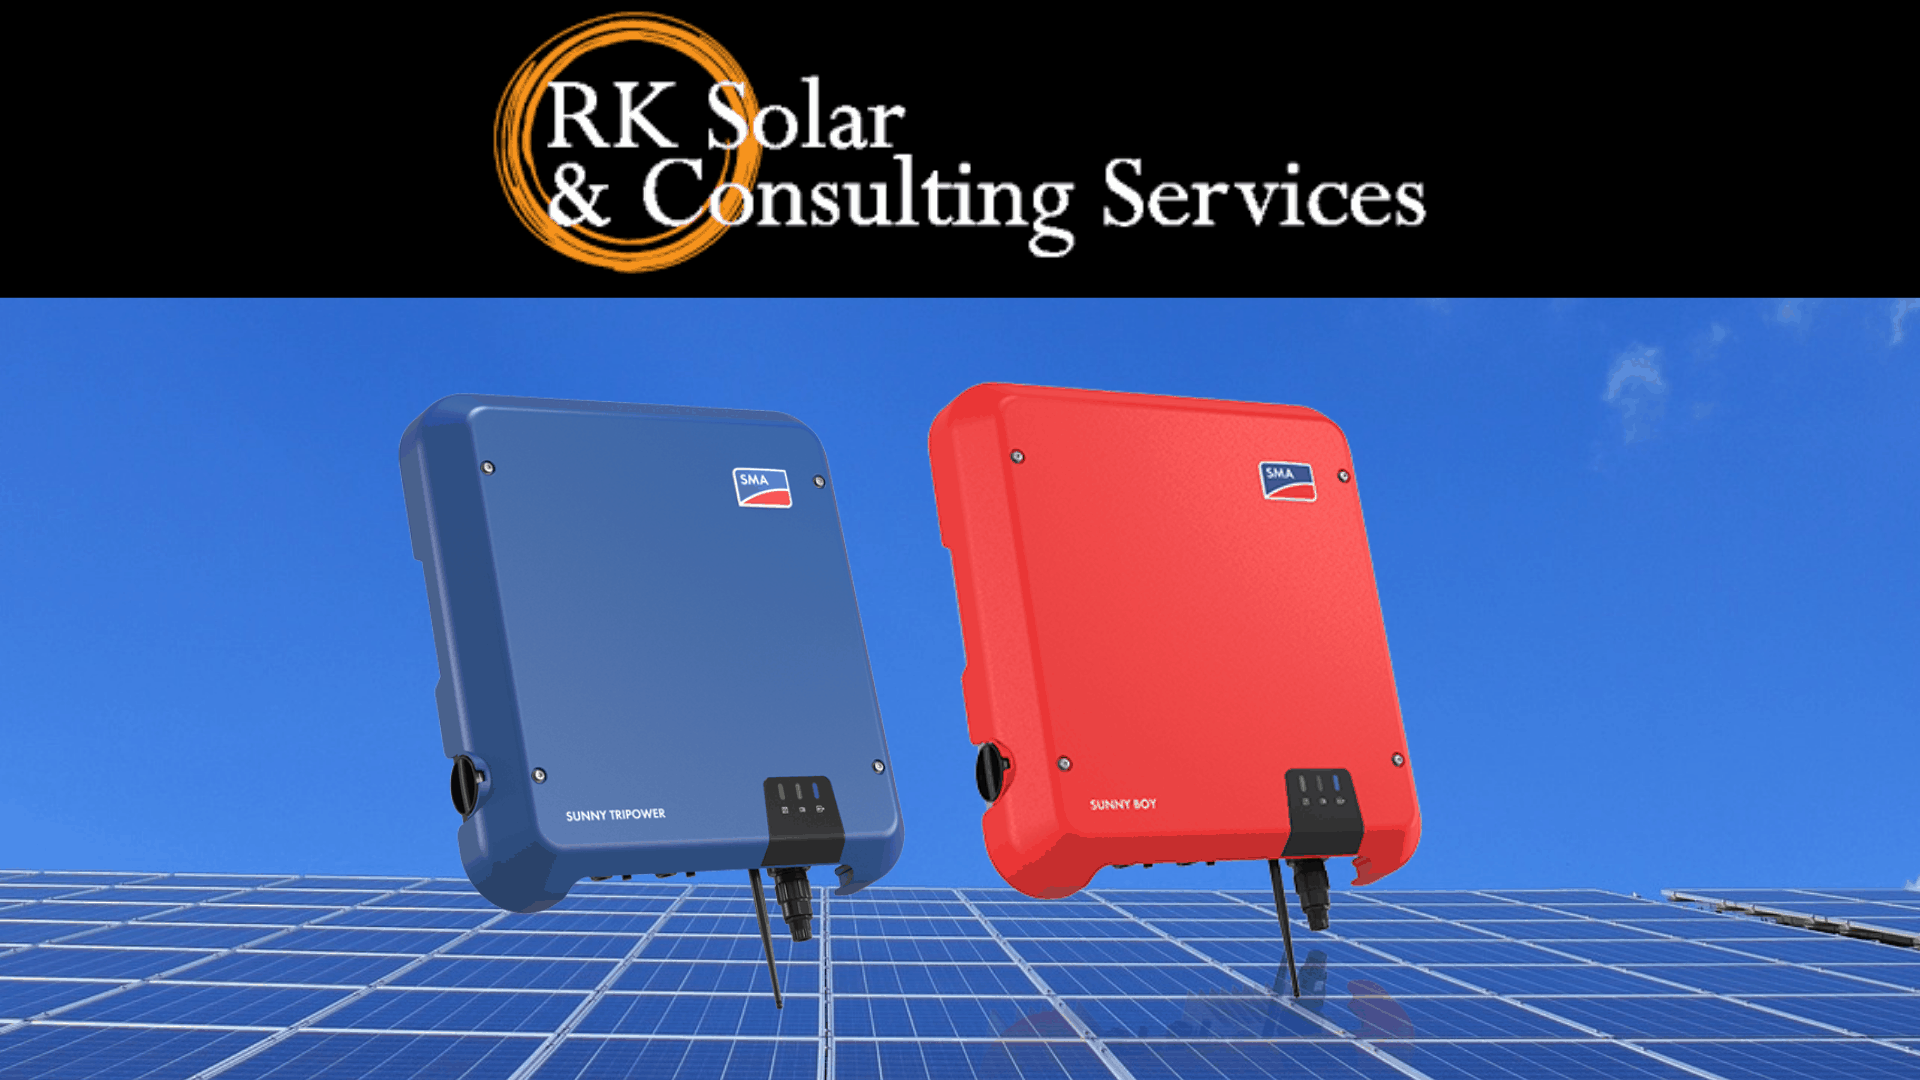 RK Solar is proud to be a SMA PowerUP Partner